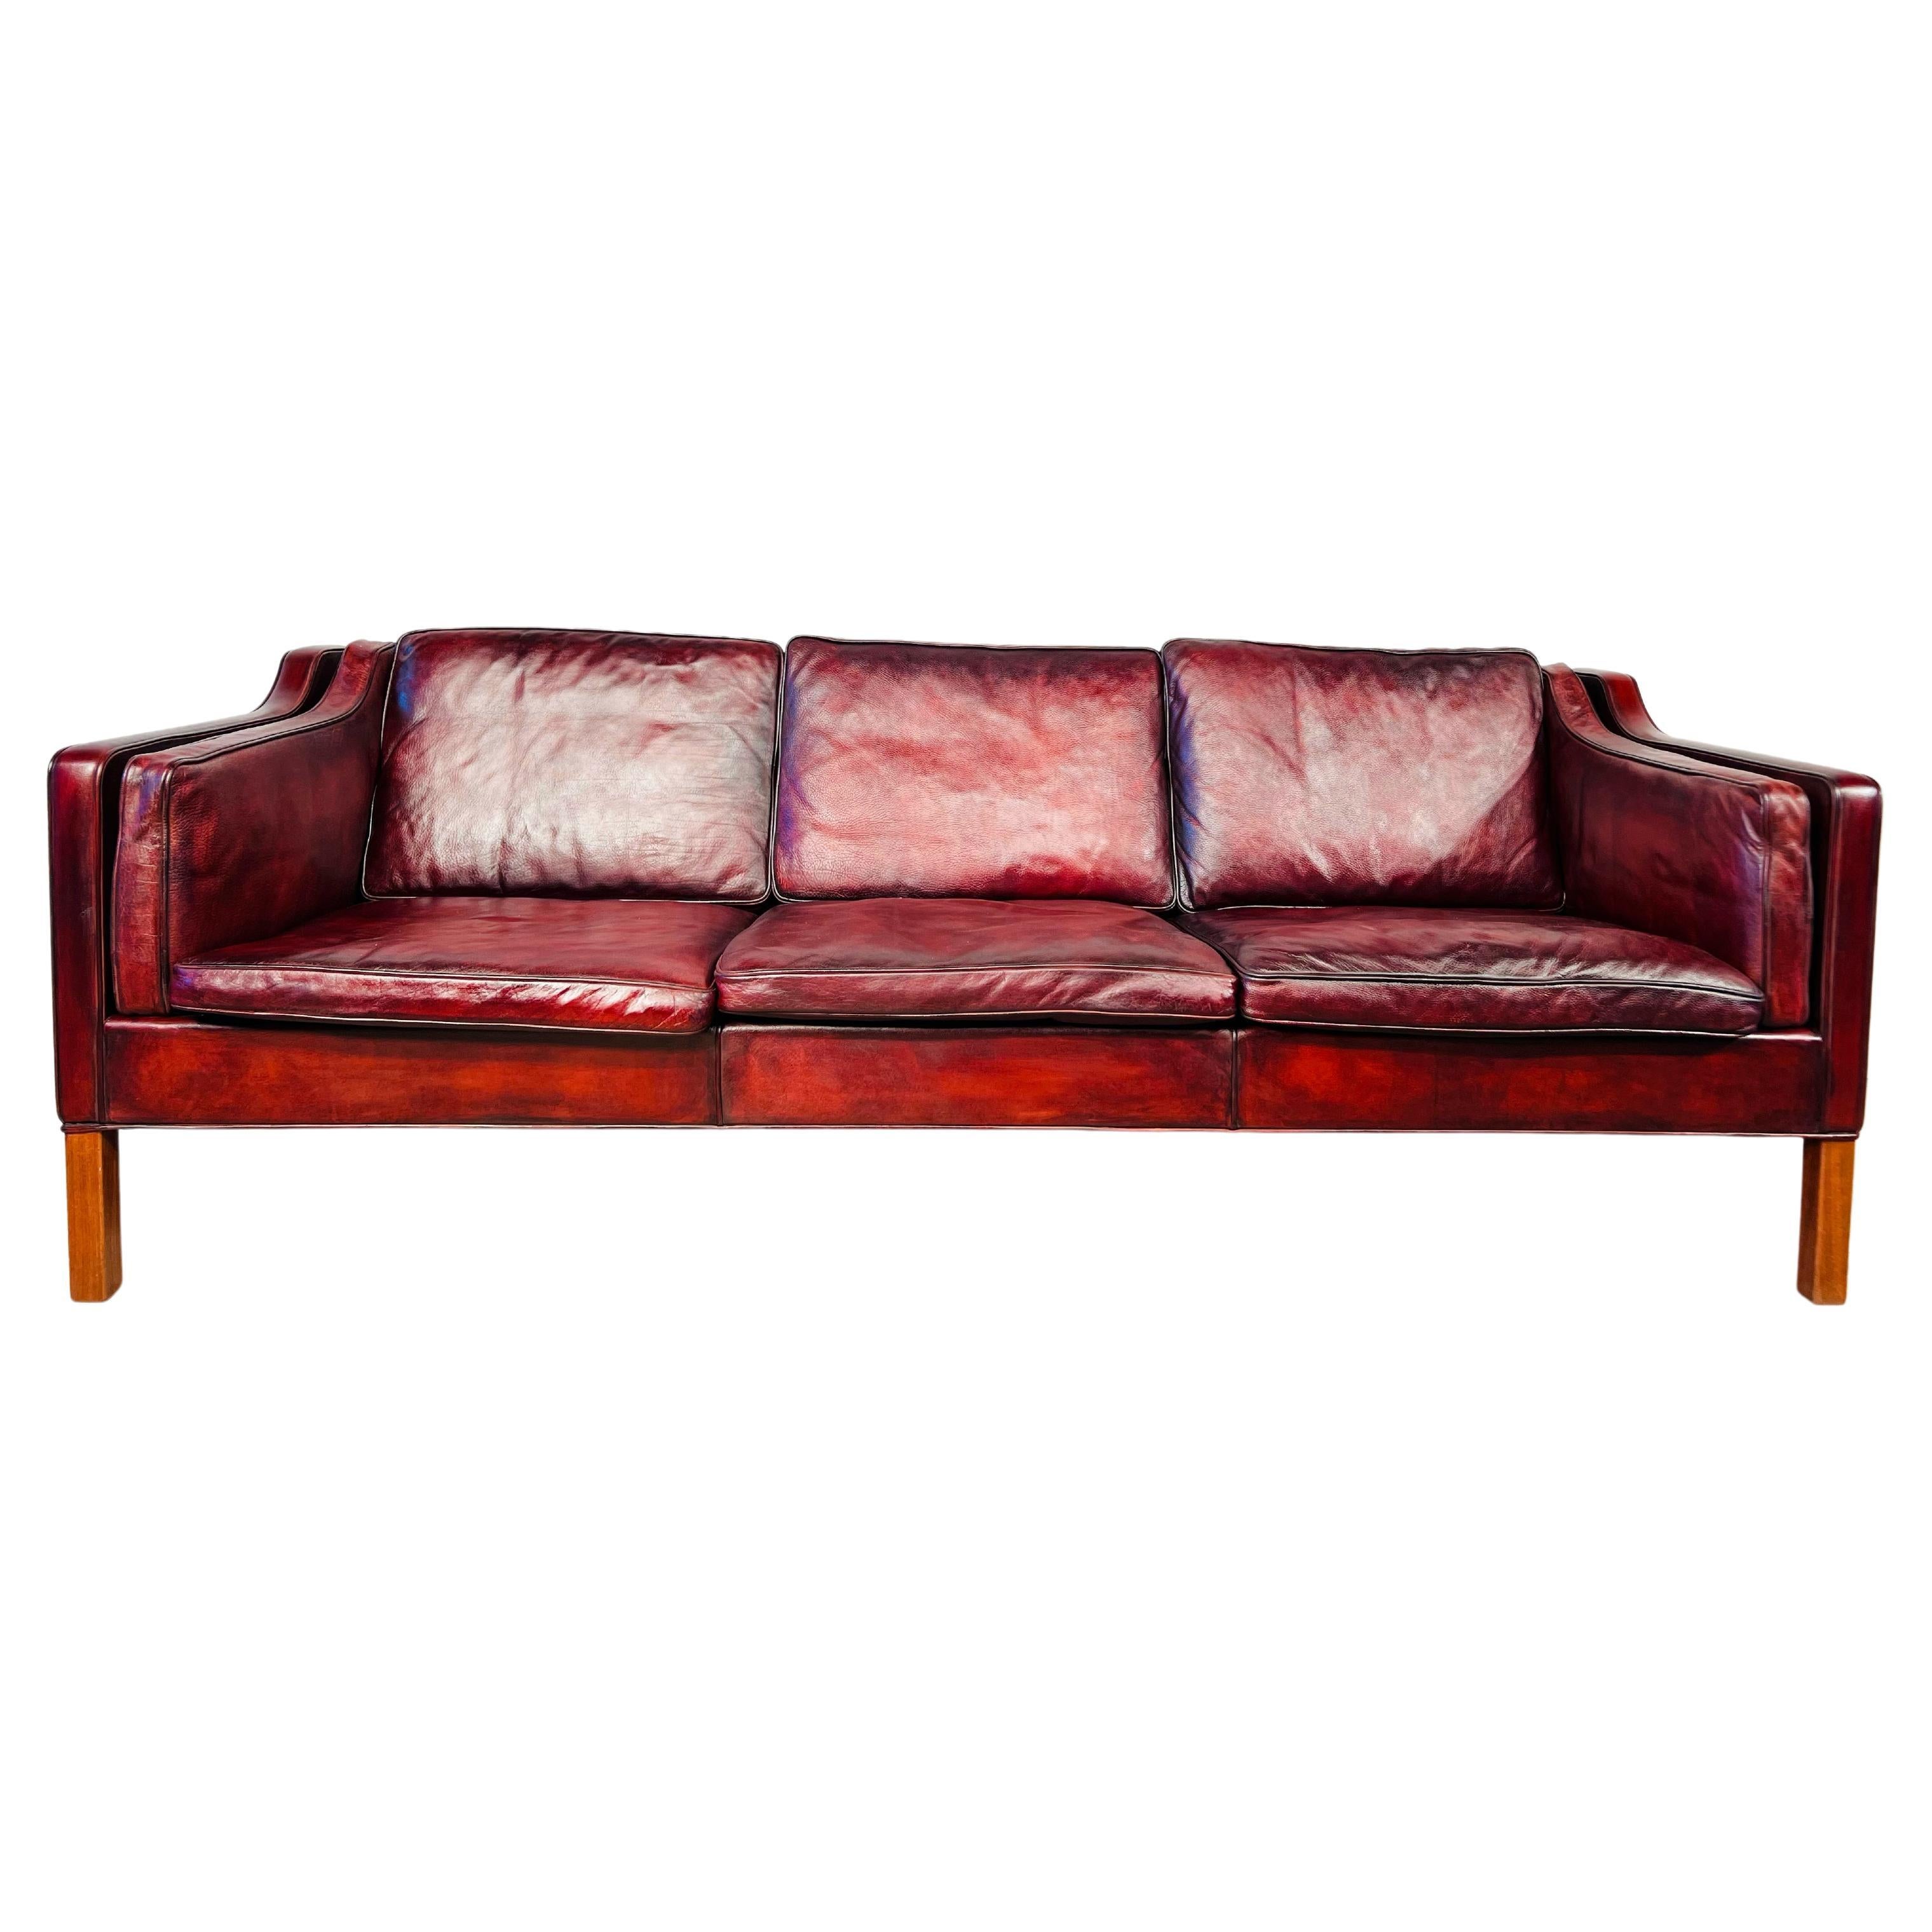 Borge Møgensen Model 2213 For Fredericia Danish Leather 3 Seater Deep Red #506 For Sale